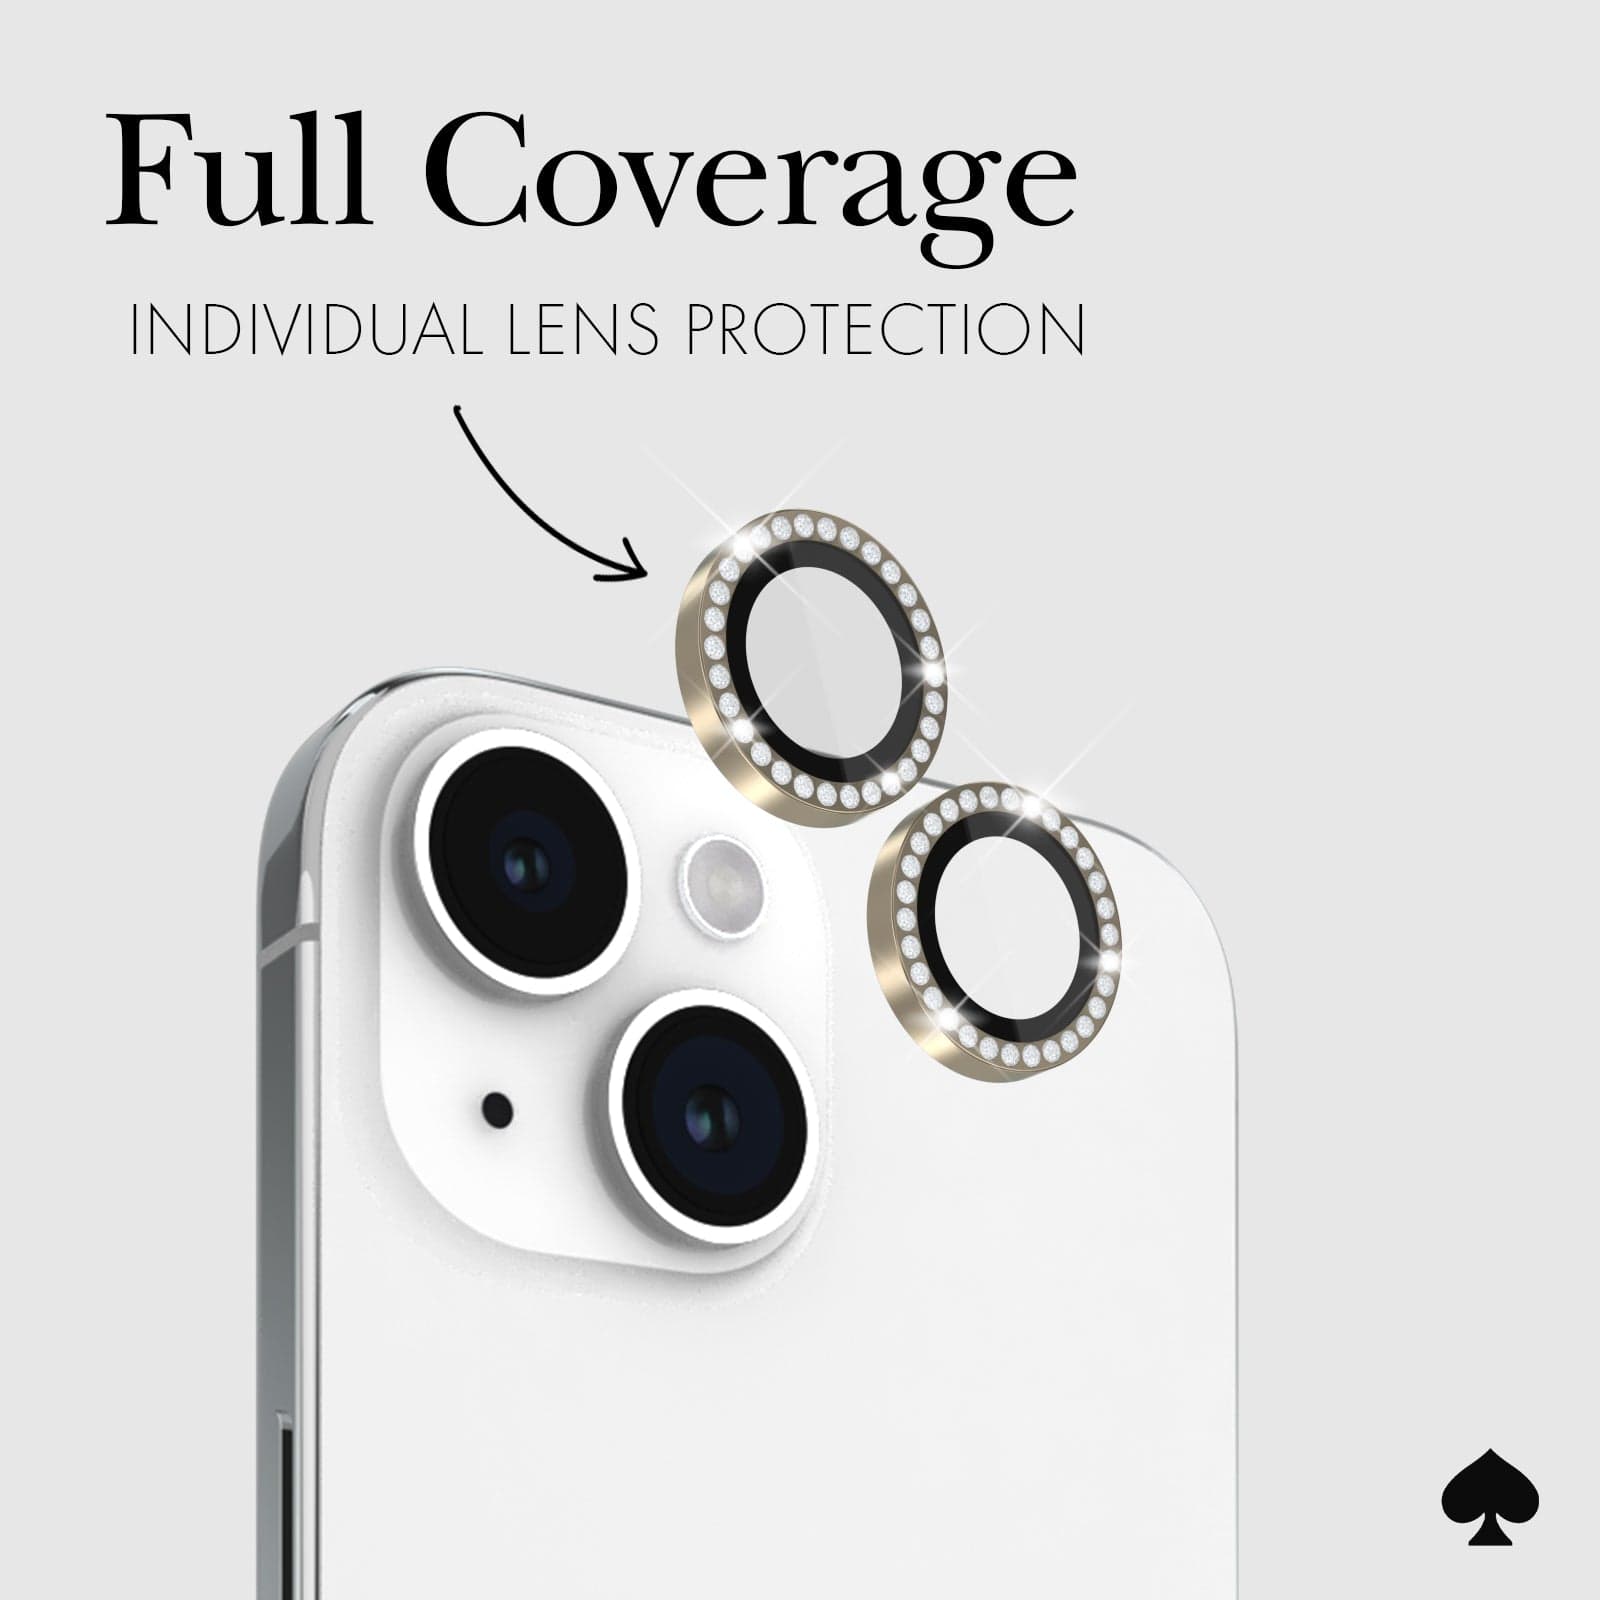 FULL COVERAGE INDIVIDUAL PROTECTION